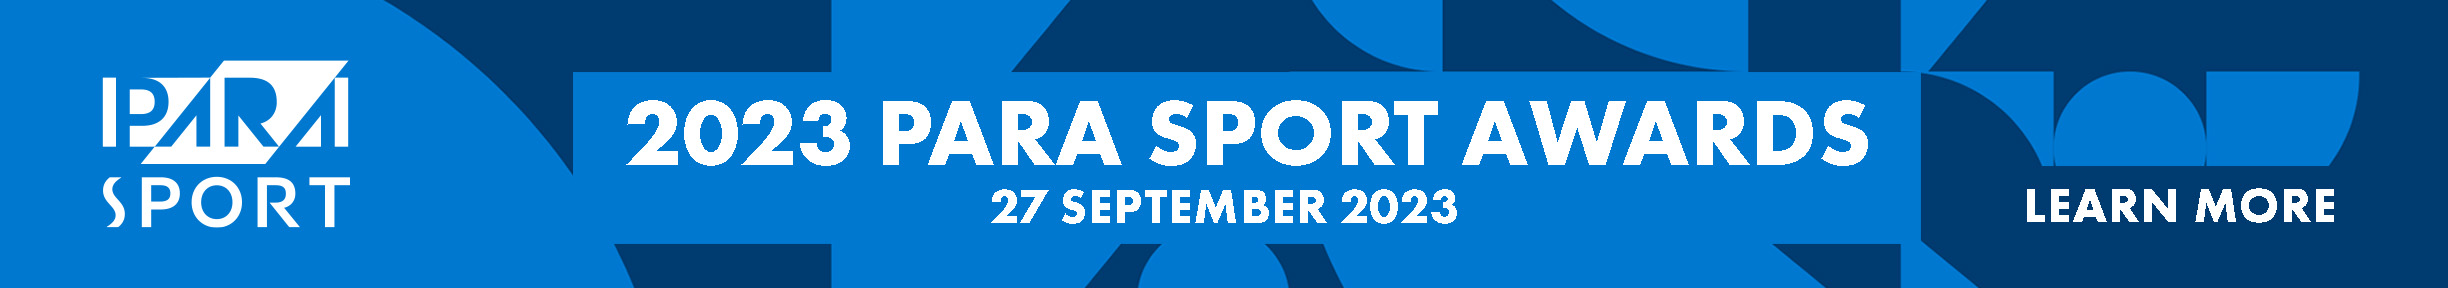 Banner with PARA SPORT brand and text about the 2023 PARA SPORT AWARDS, on 27 September 2023.